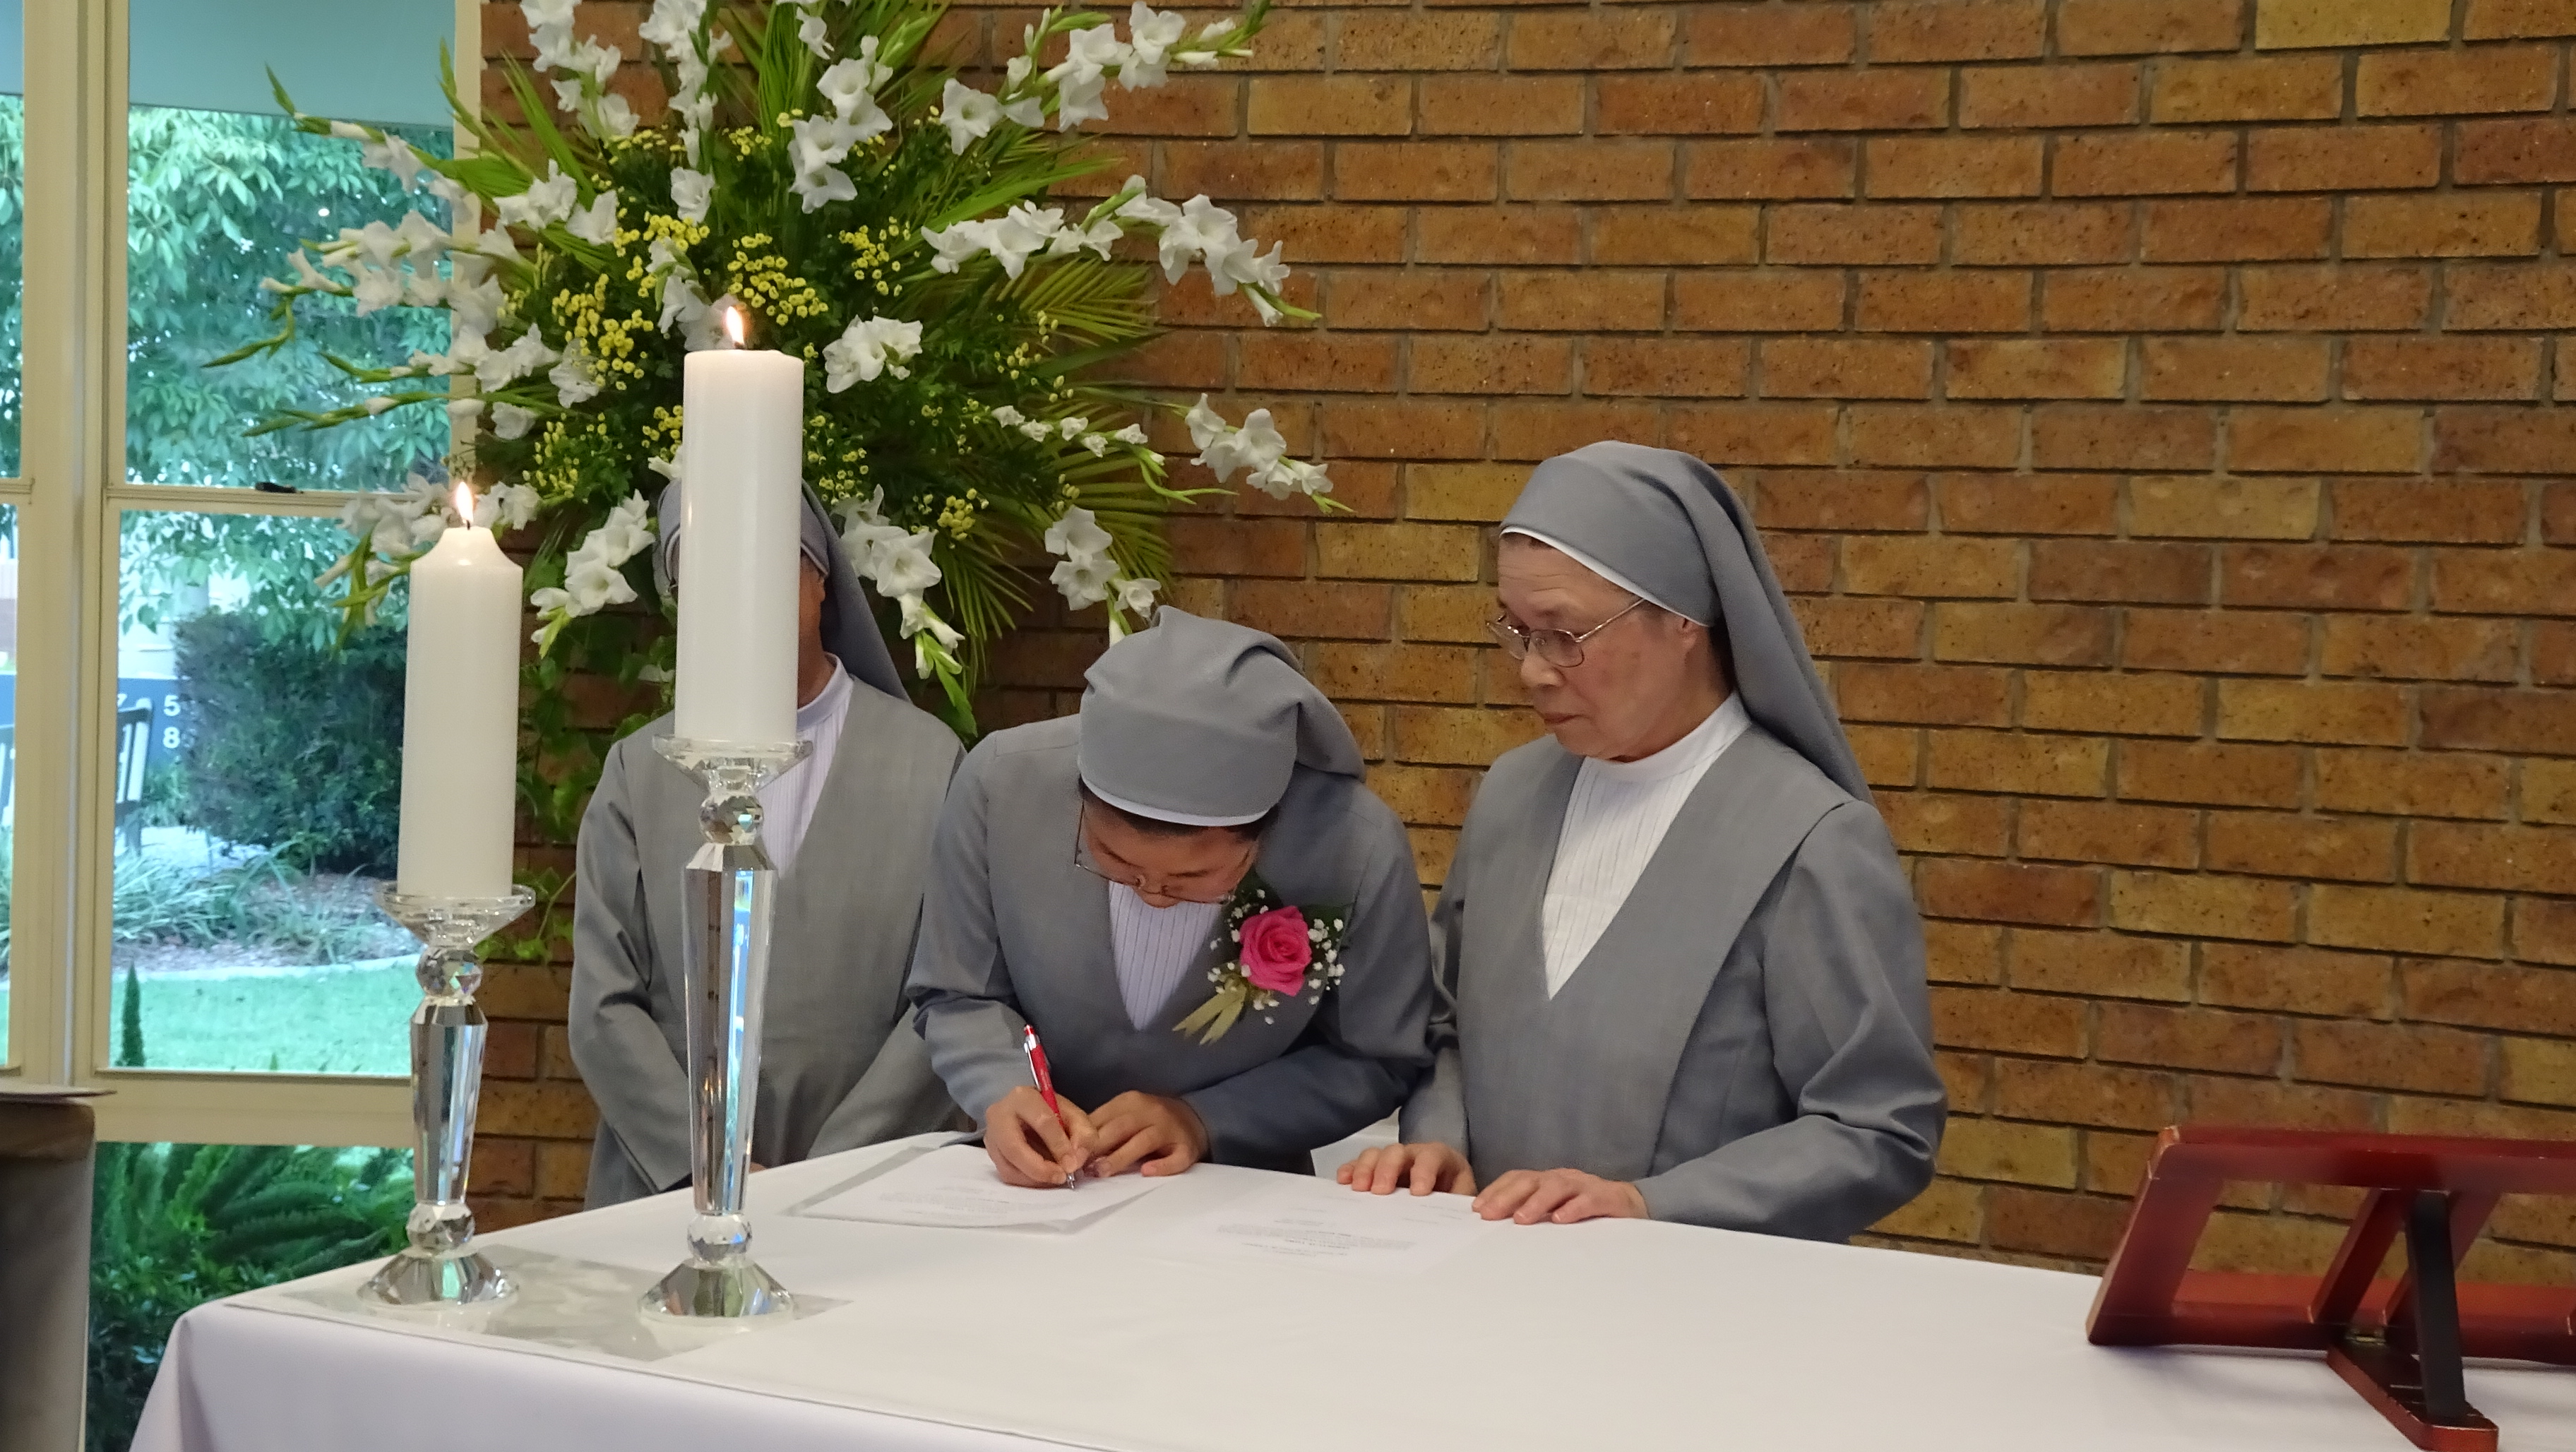 Sr Veronica signed the form